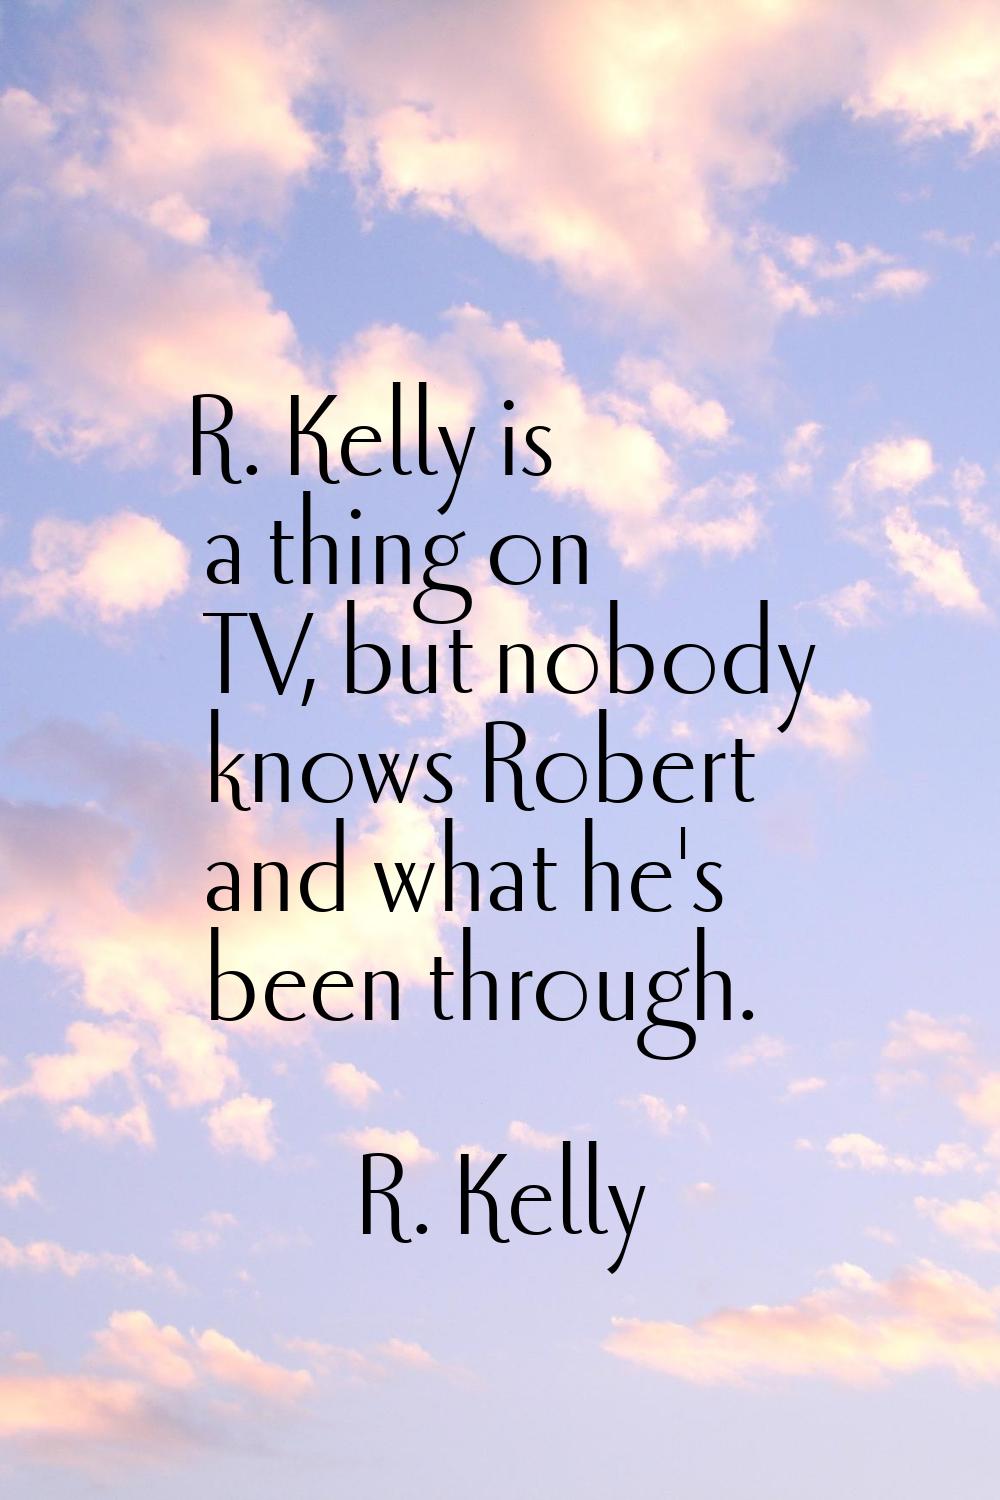 R. Kelly is a thing on TV, but nobody knows Robert and what he's been through.